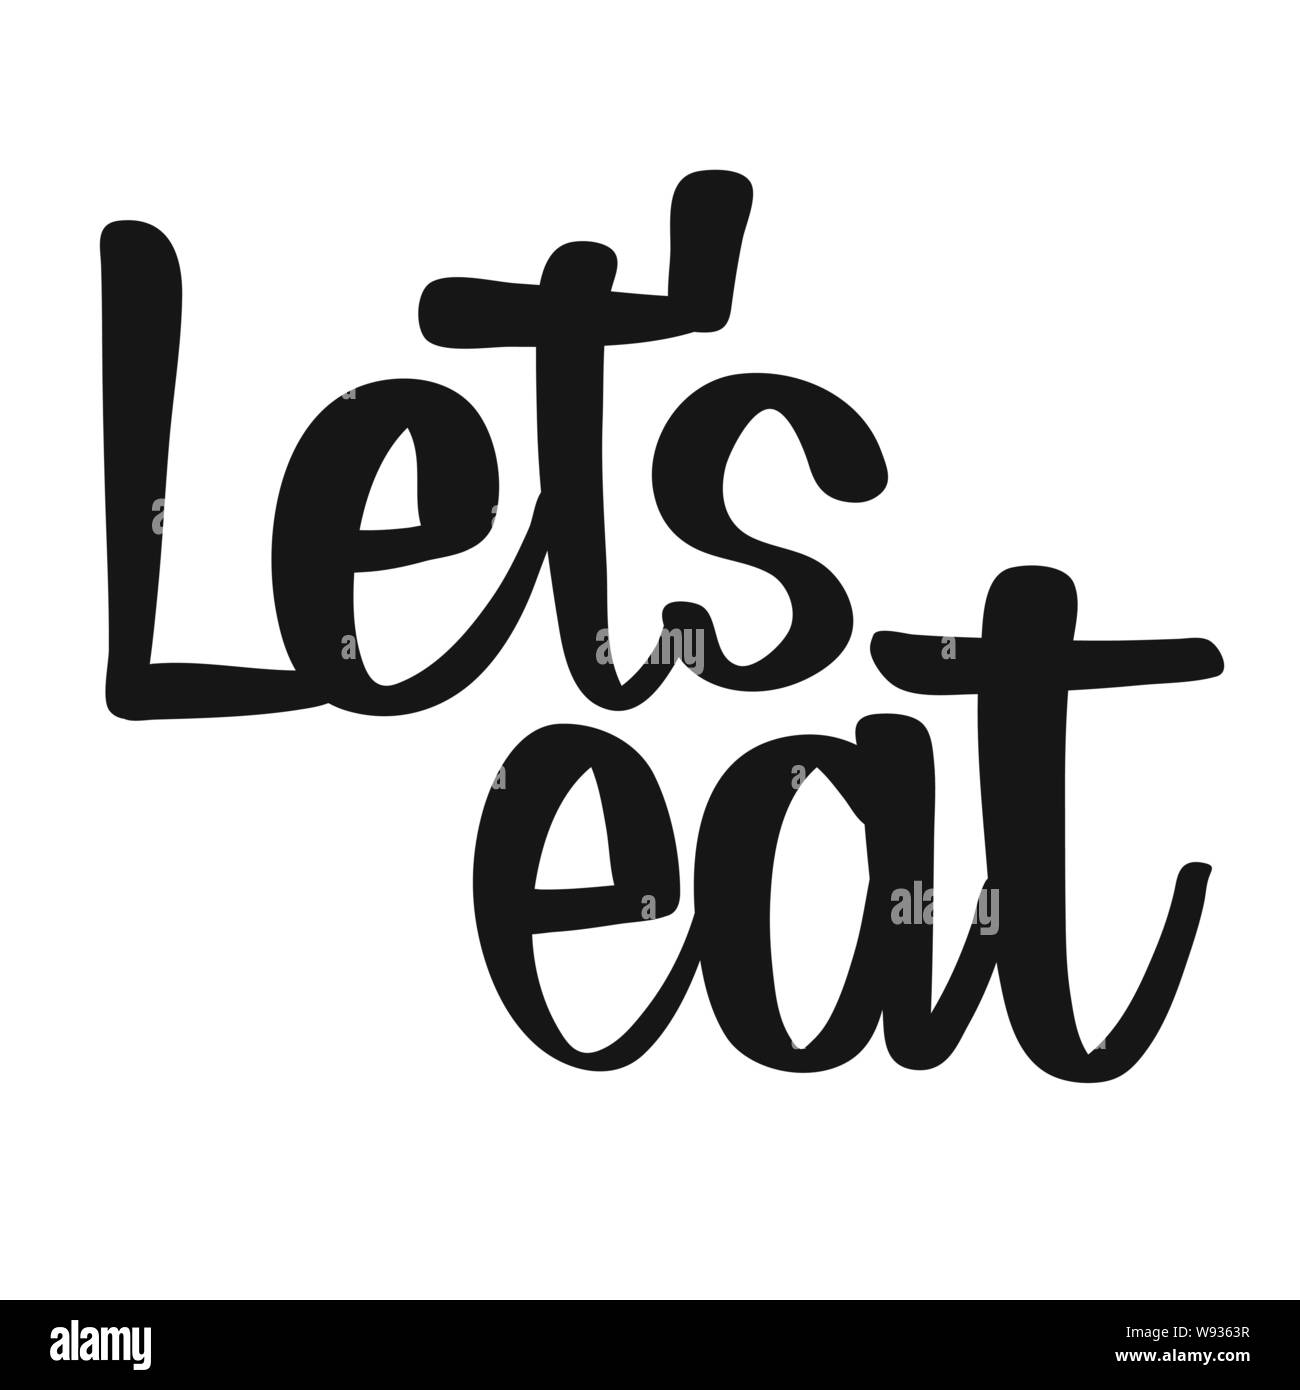 Let’s Eat handwritten lettering. Printable Kitchen art sign for Food and Cook topics. Stock Vector